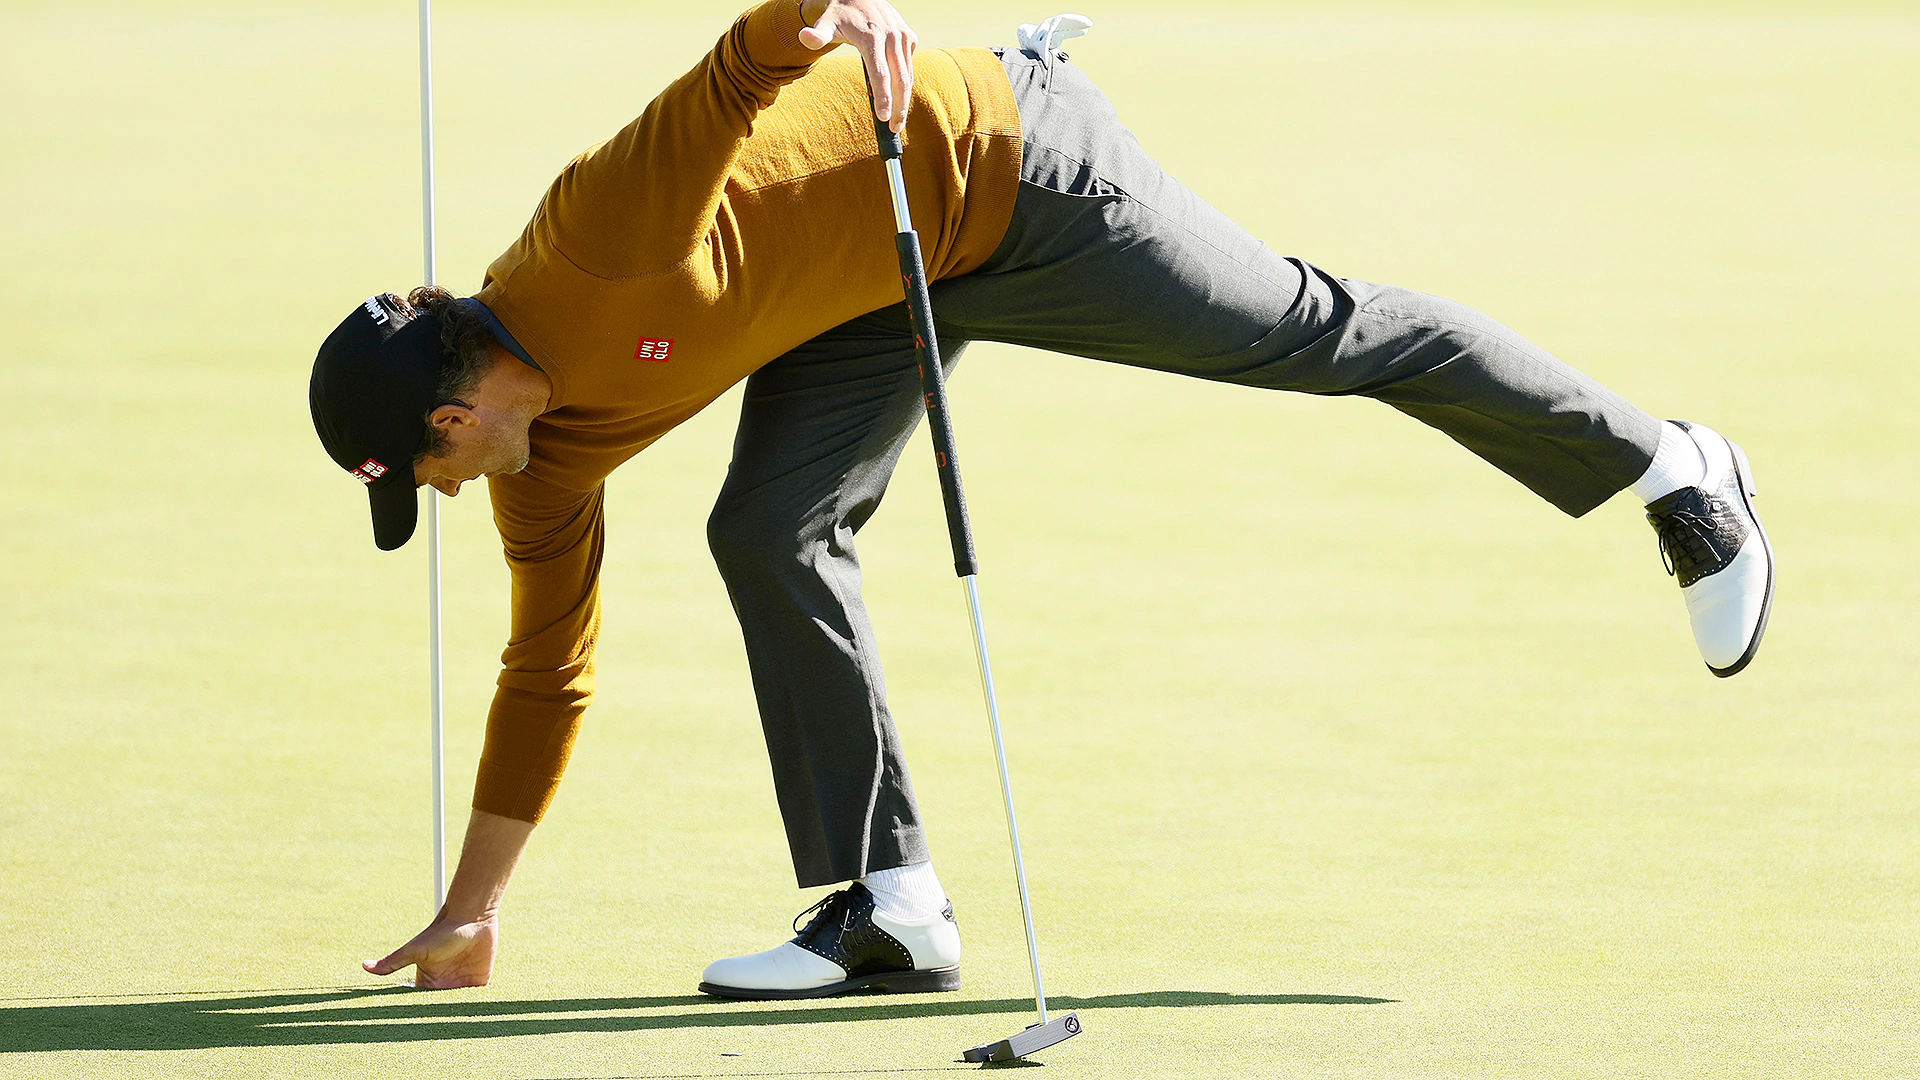 Adam Scott adds new putter to be ‘entertained’ and it works in Round 1 at Riviera